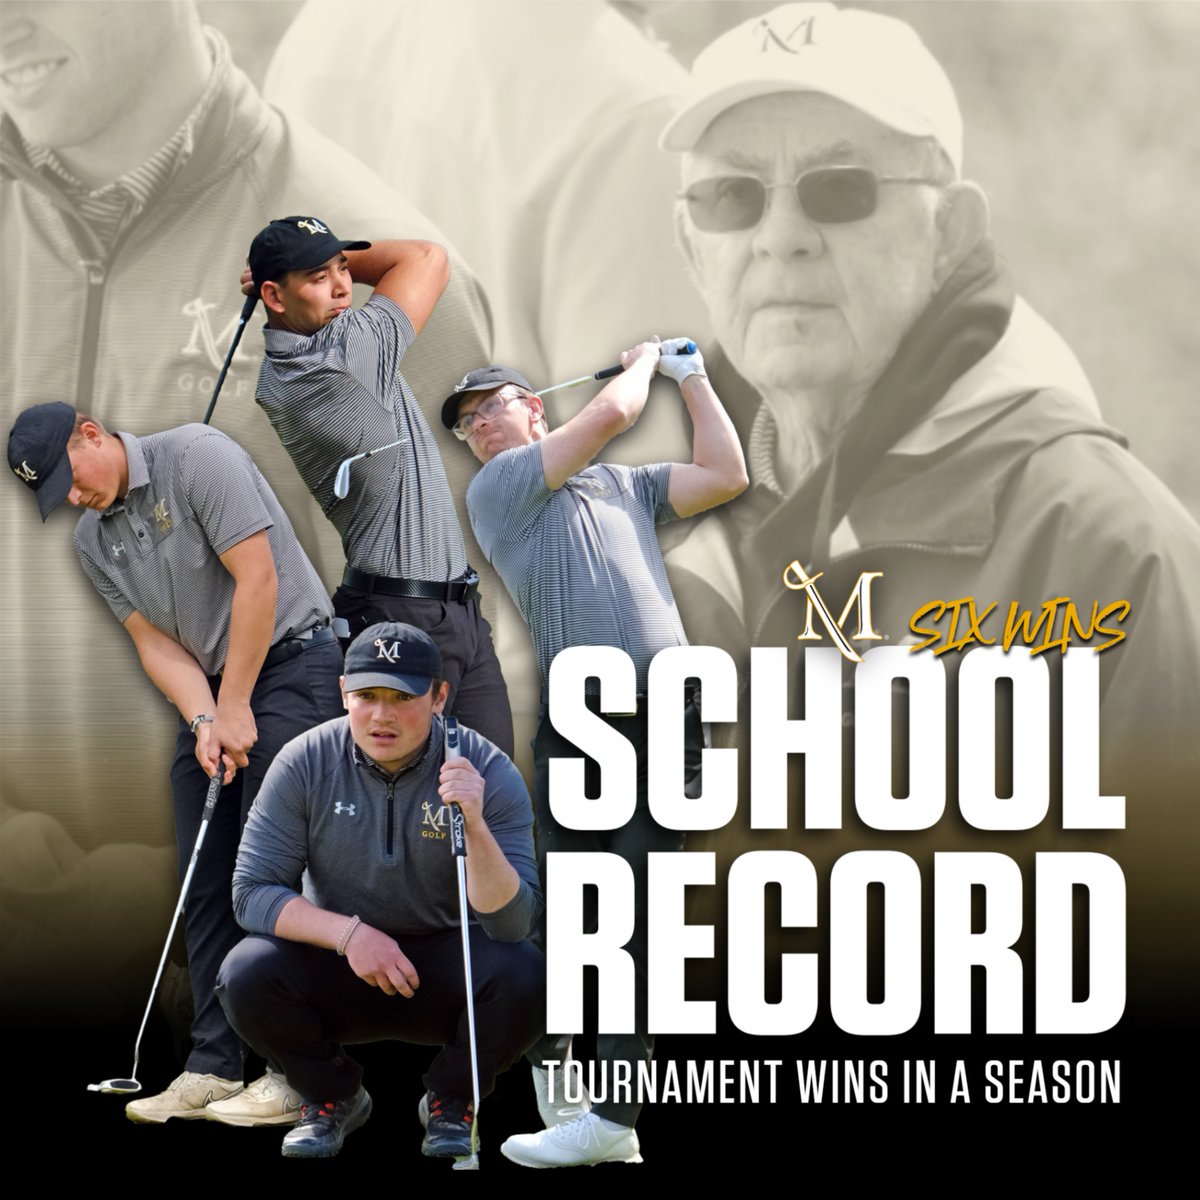 With the 'Ville golf's sixth win today, it has tied a school record for wins in a season!